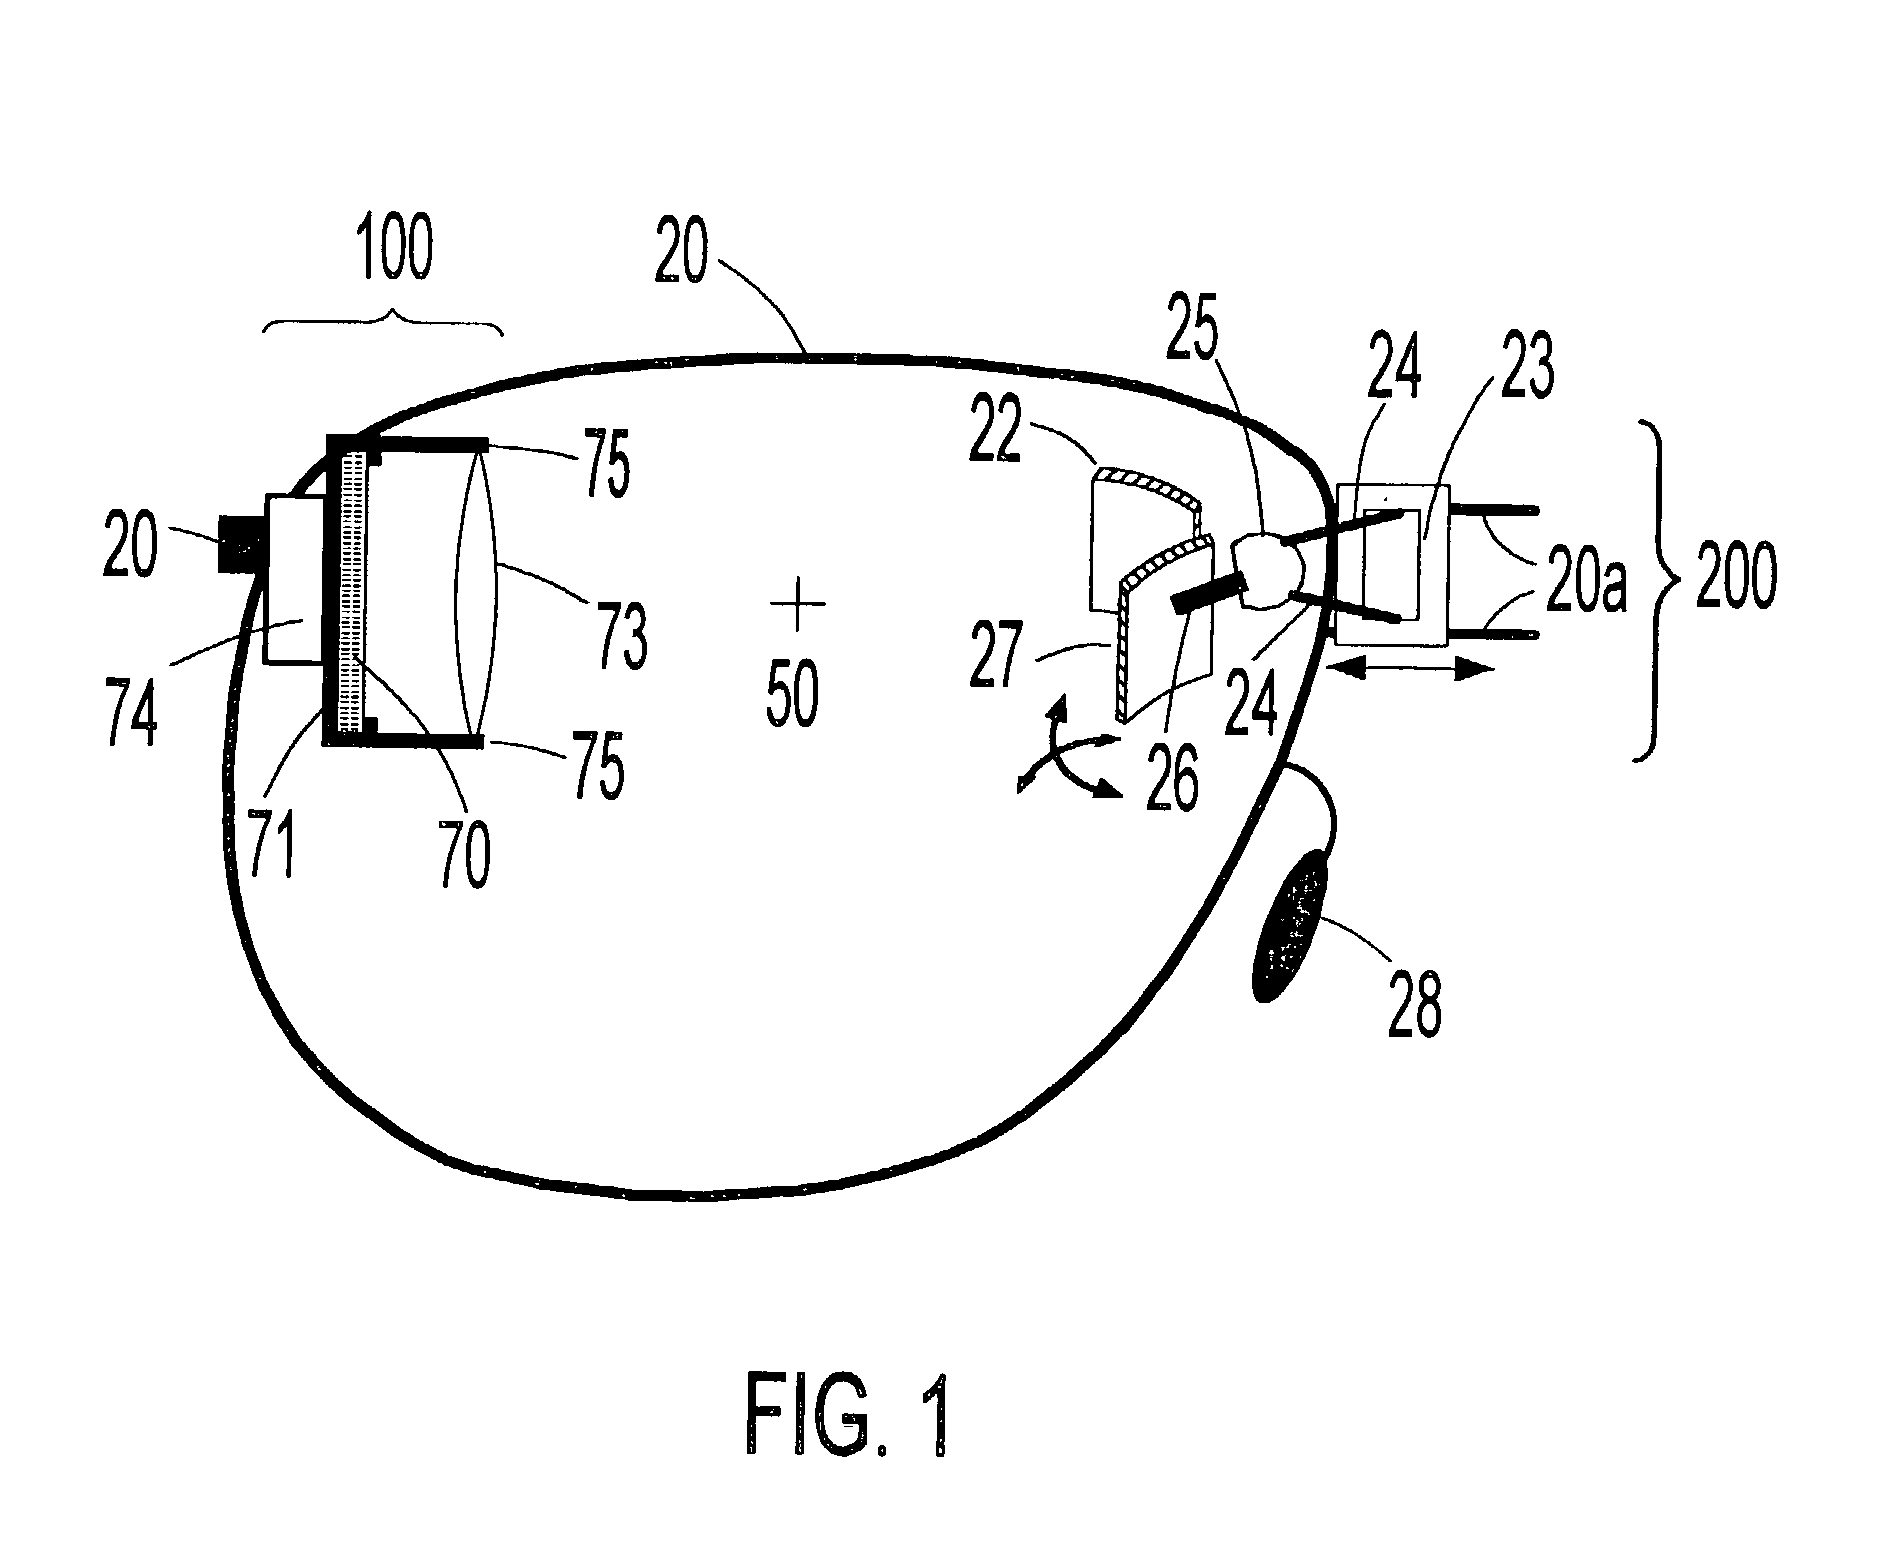 Virtual display apparatus for mobile activities